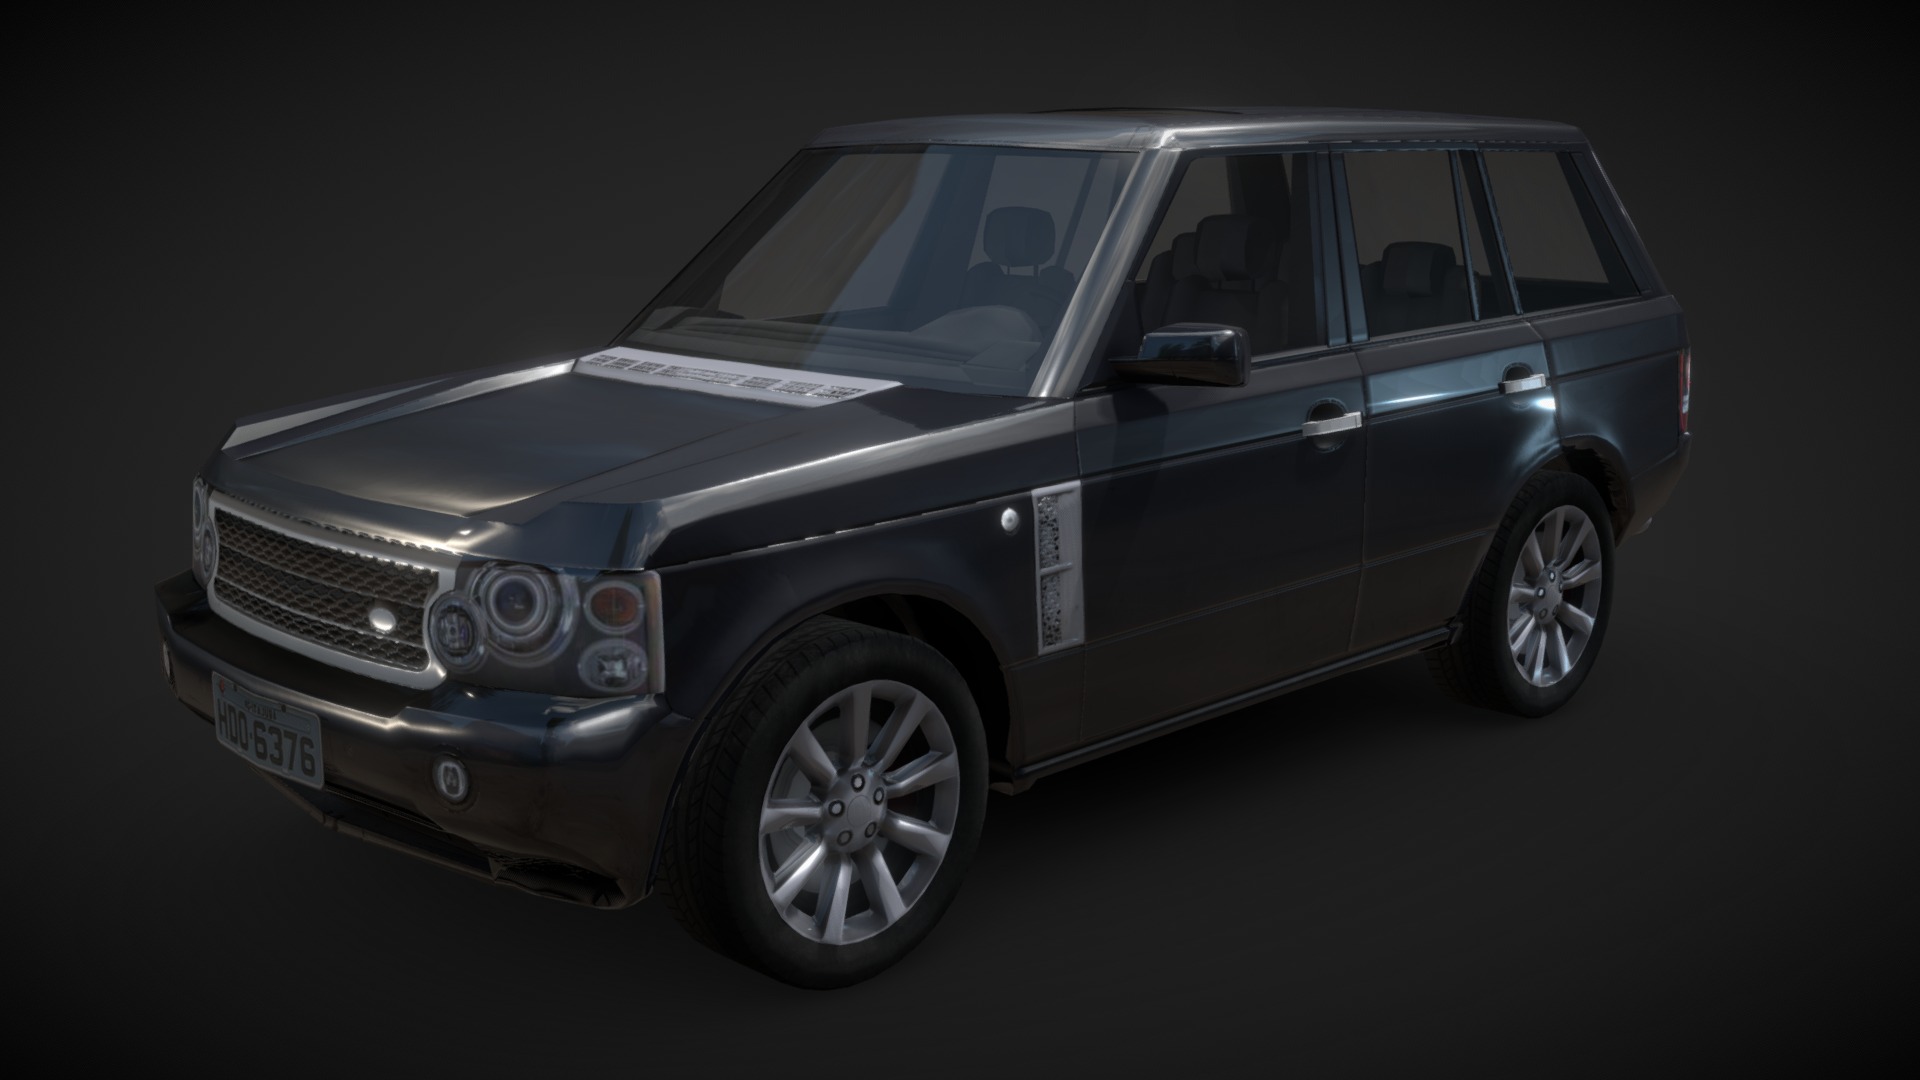 3D model Jeep Cherokee Low poly - This is a 3D model of the Jeep Cherokee Low poly. The 3D model is about a car parked on pavement.